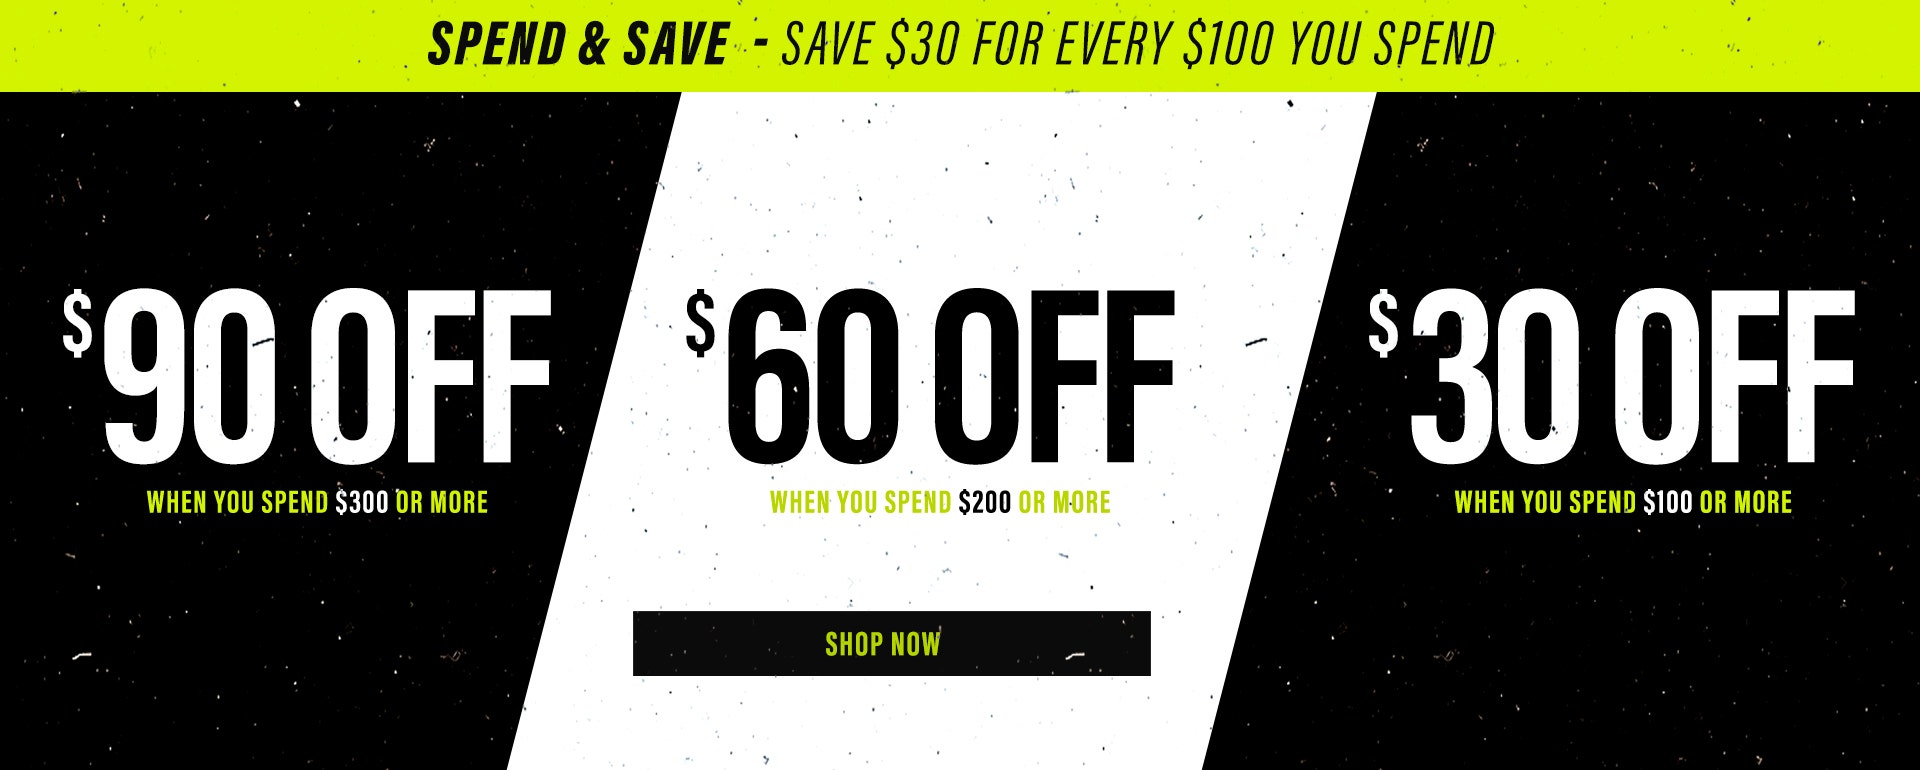 Spend and Save - Up to $90 OFF